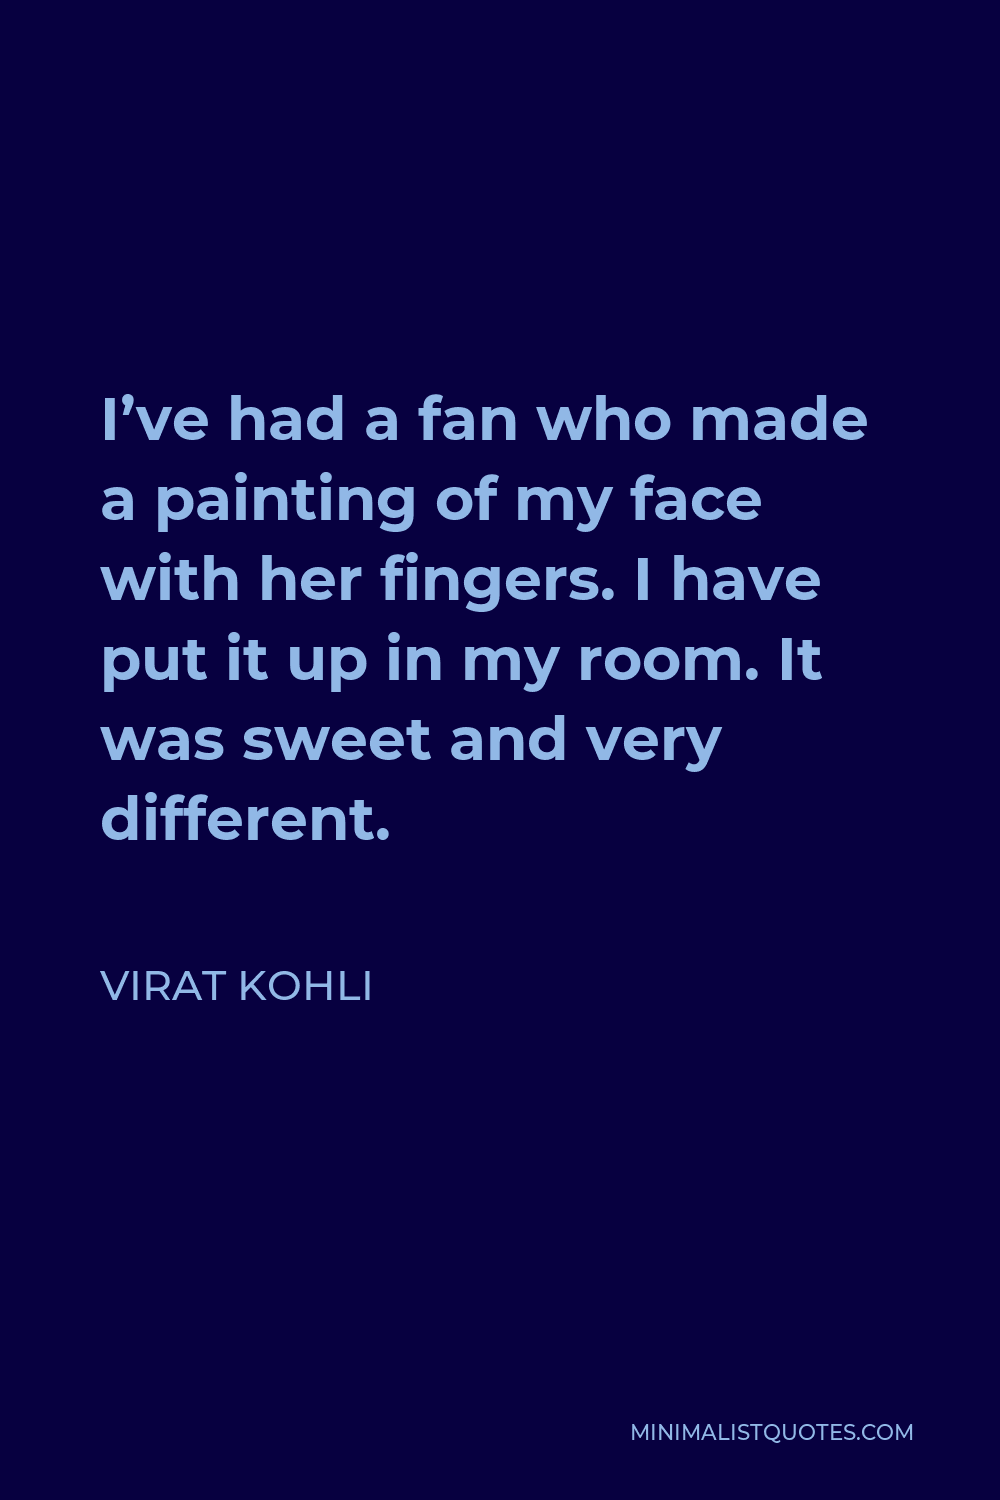 Virat Kohli Quote - I’ve had a fan who made a painting of my face with her fingers. I have put it up in my room. It was sweet and very different.